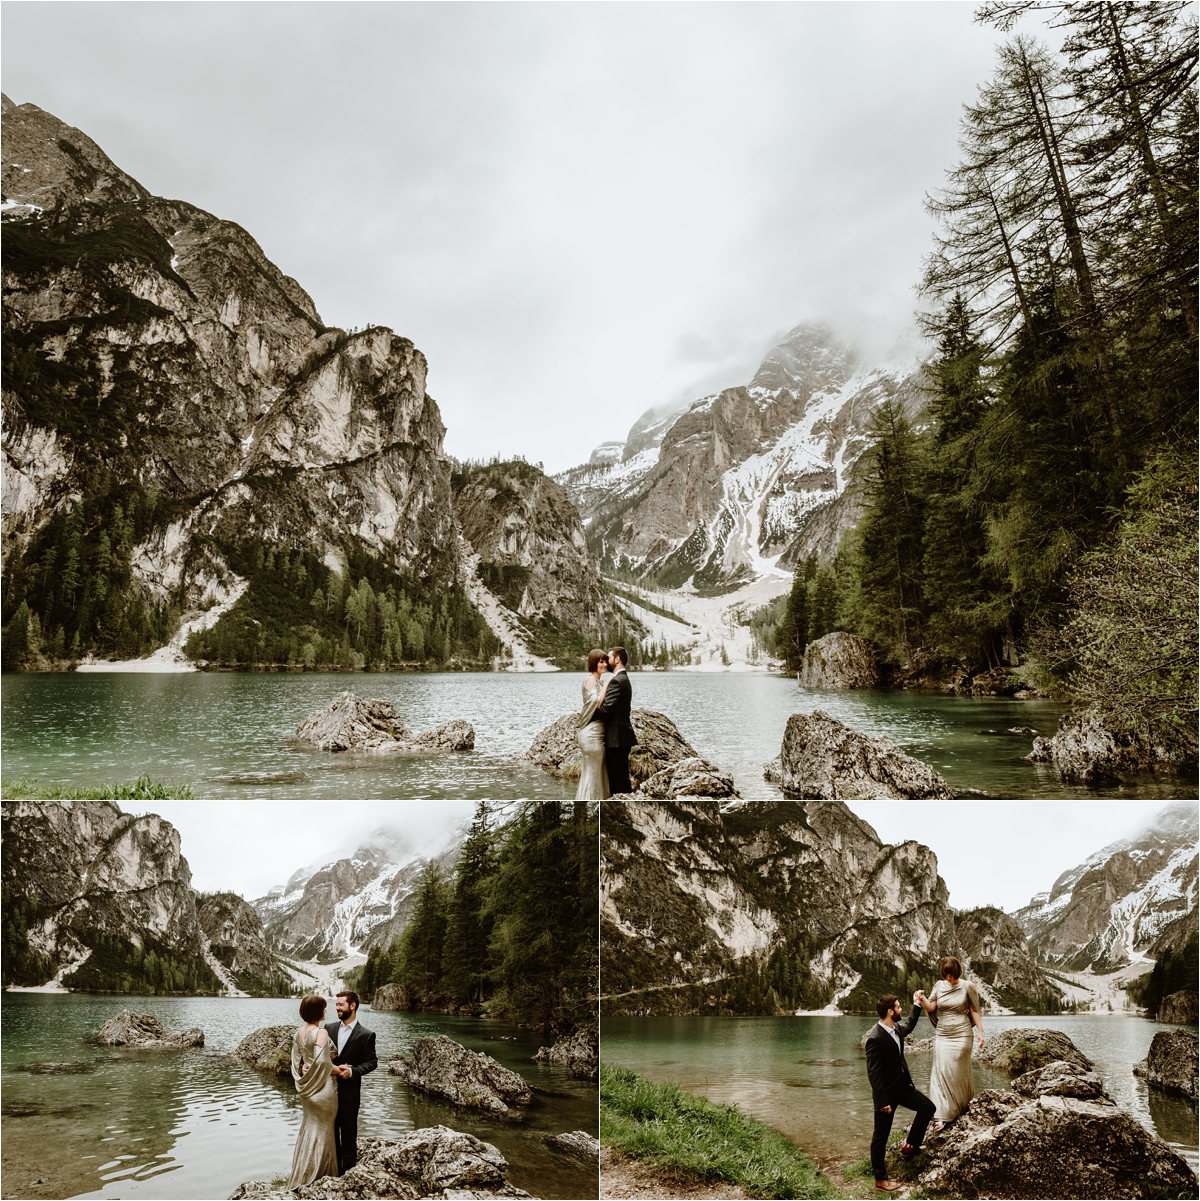 Bride & groom stand on the rocks around Lake Braies in the Italian Alps, wearing a gold wedding gown. Photo by Wild Connections Photography